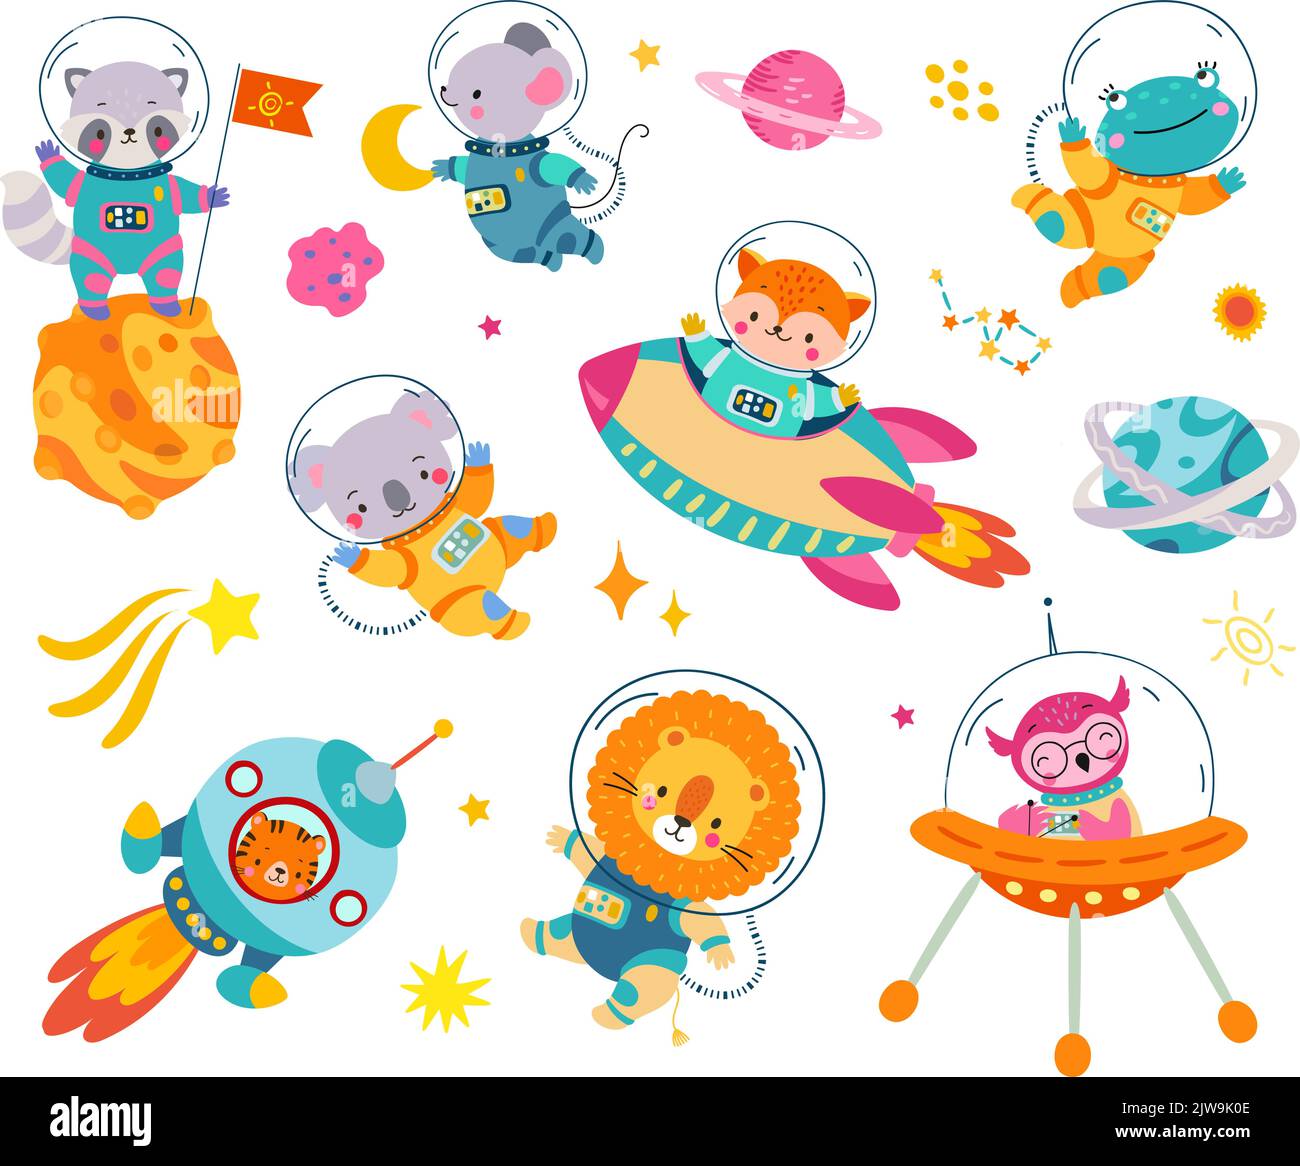 Space animals set in cosmonaut suit. Astronauts flying in rocket and in open universe. Planets, stars comet and constellation. Nowaday cute kids Stock Vector